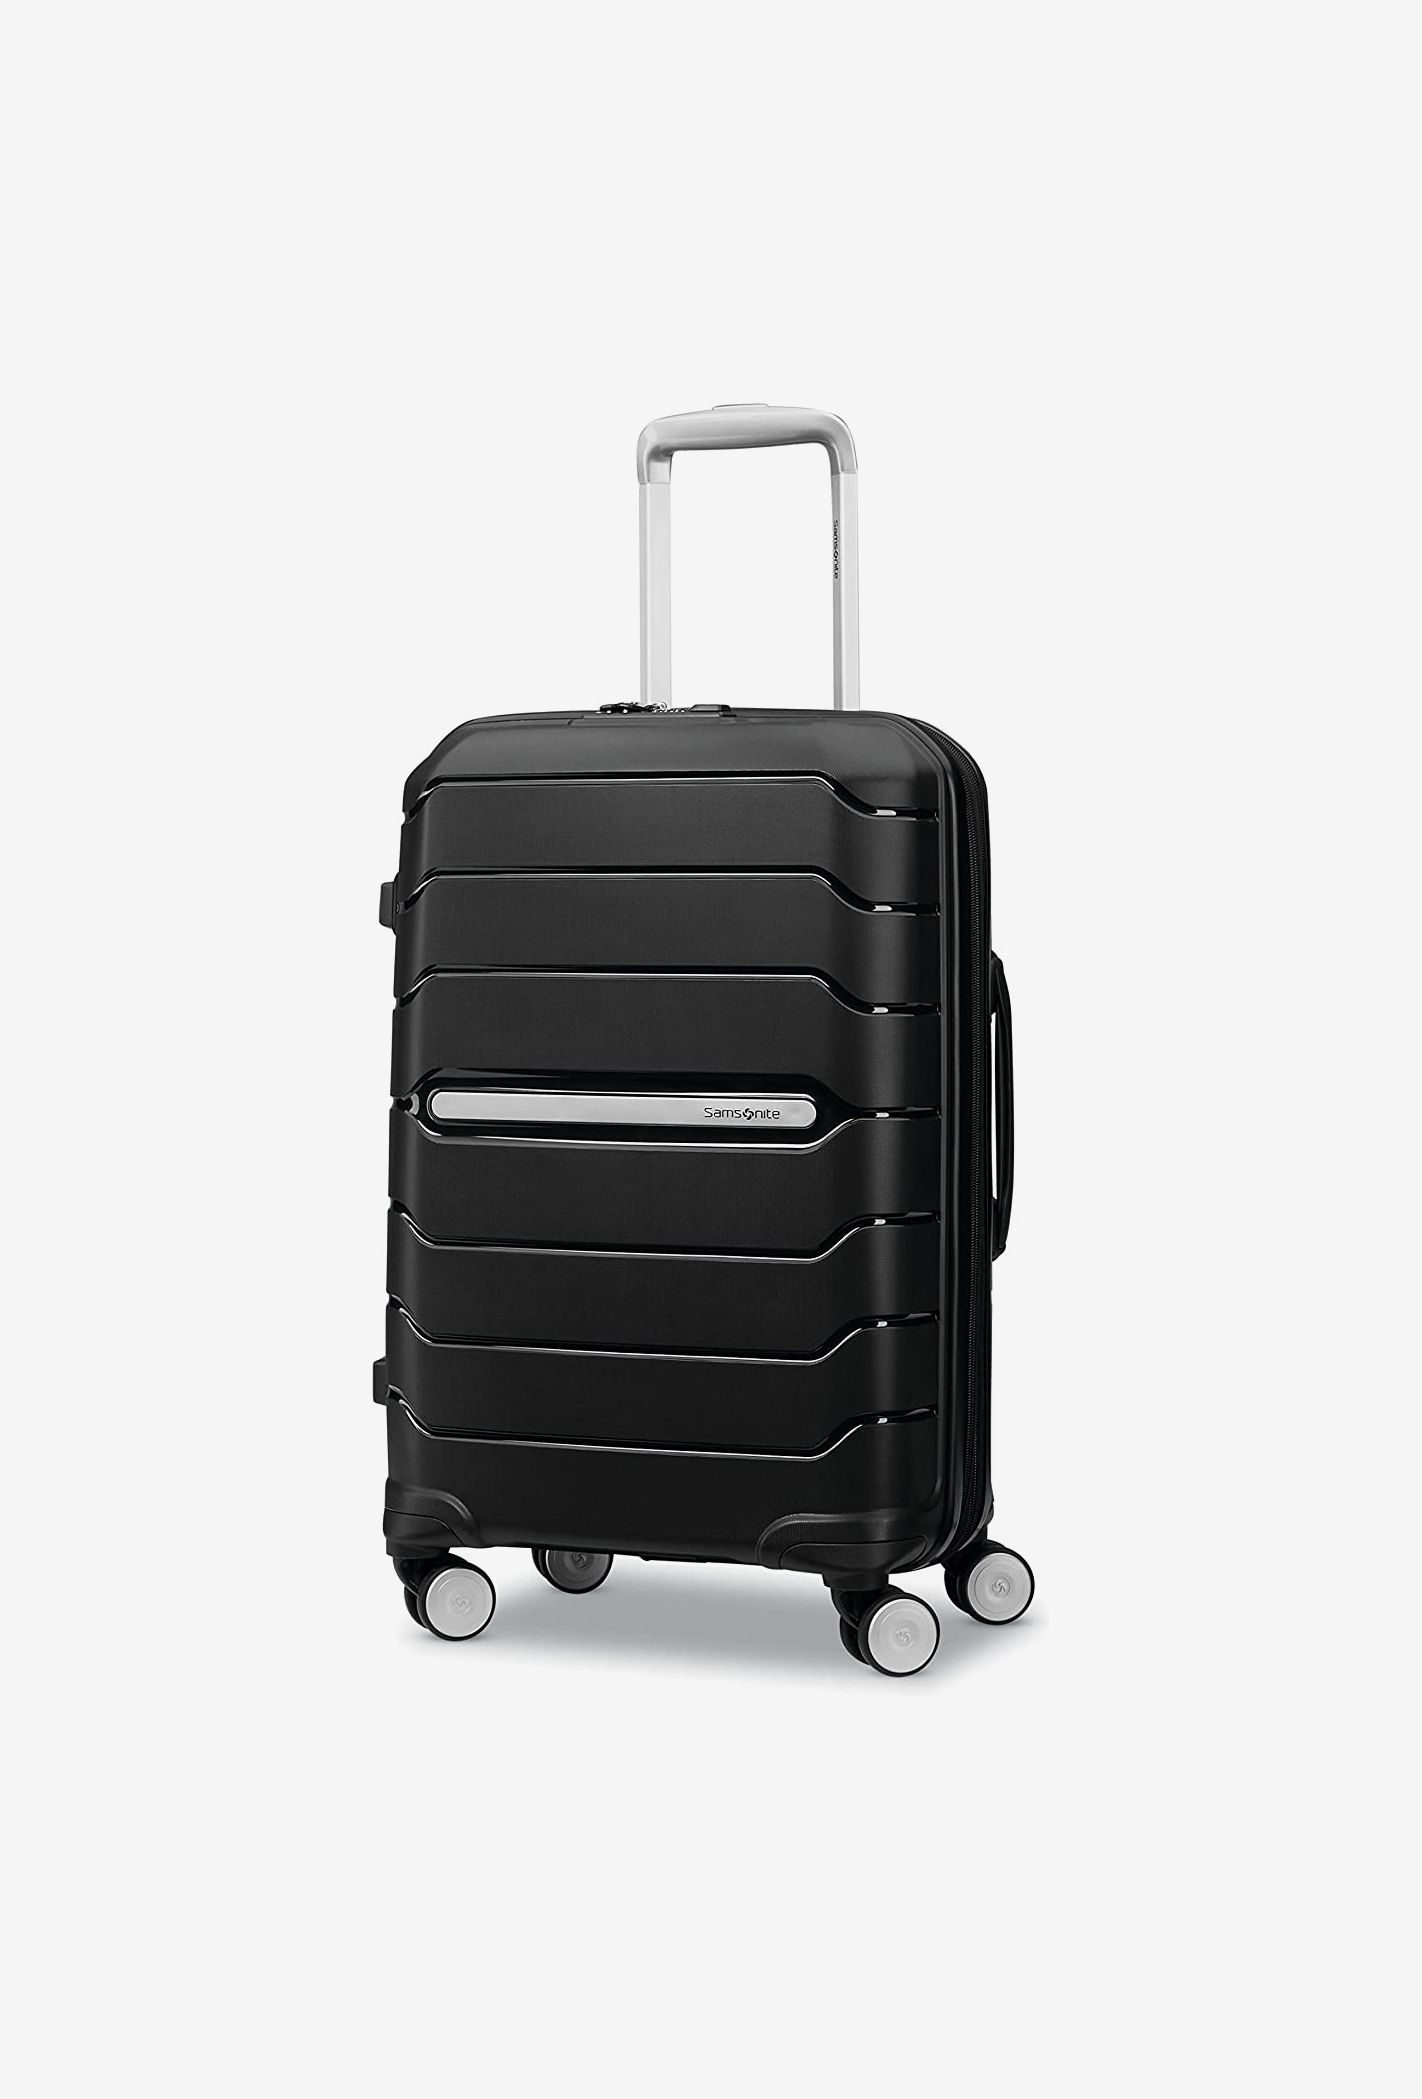 The 13 Best Rolling Luggage, According to Frequent Fliers